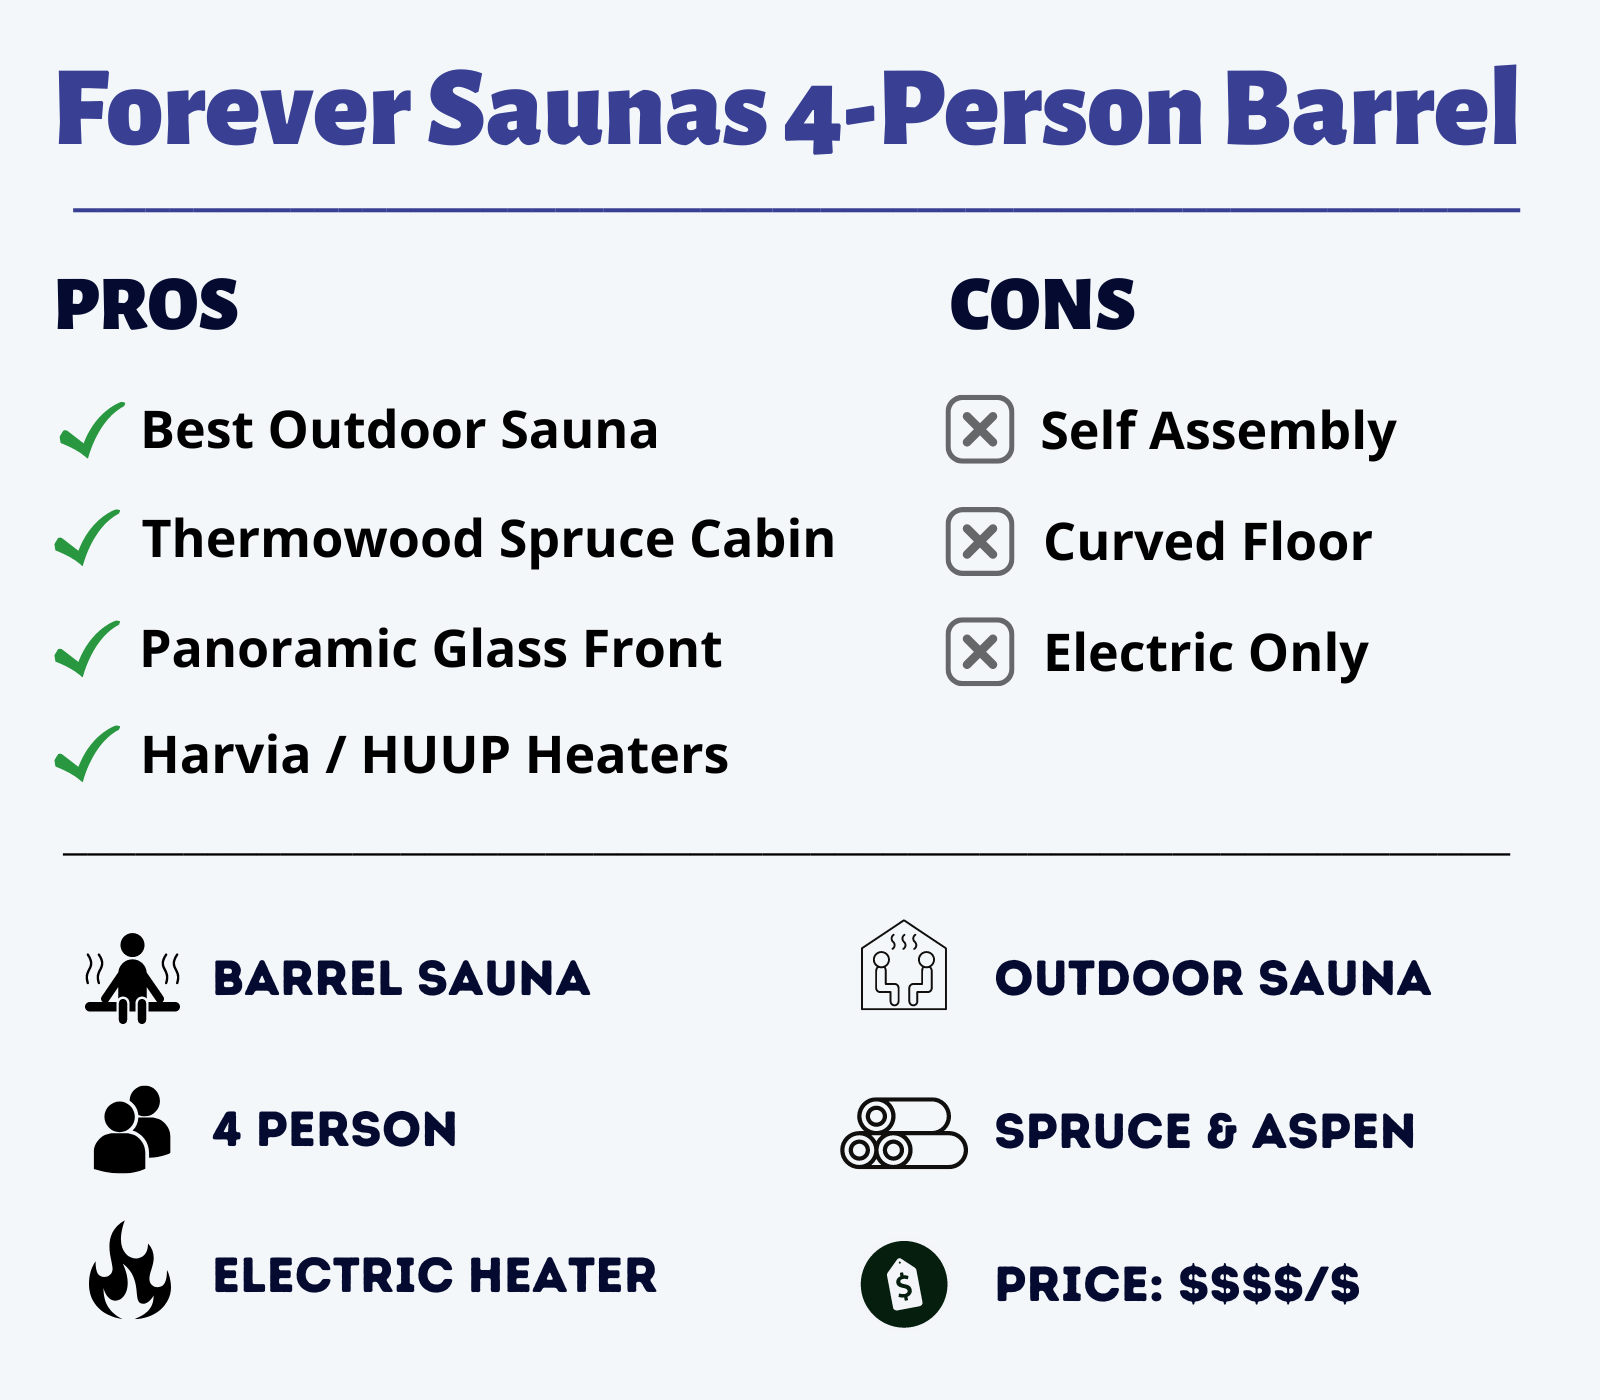 Forever Saunas 4-Person Barrel overview and review